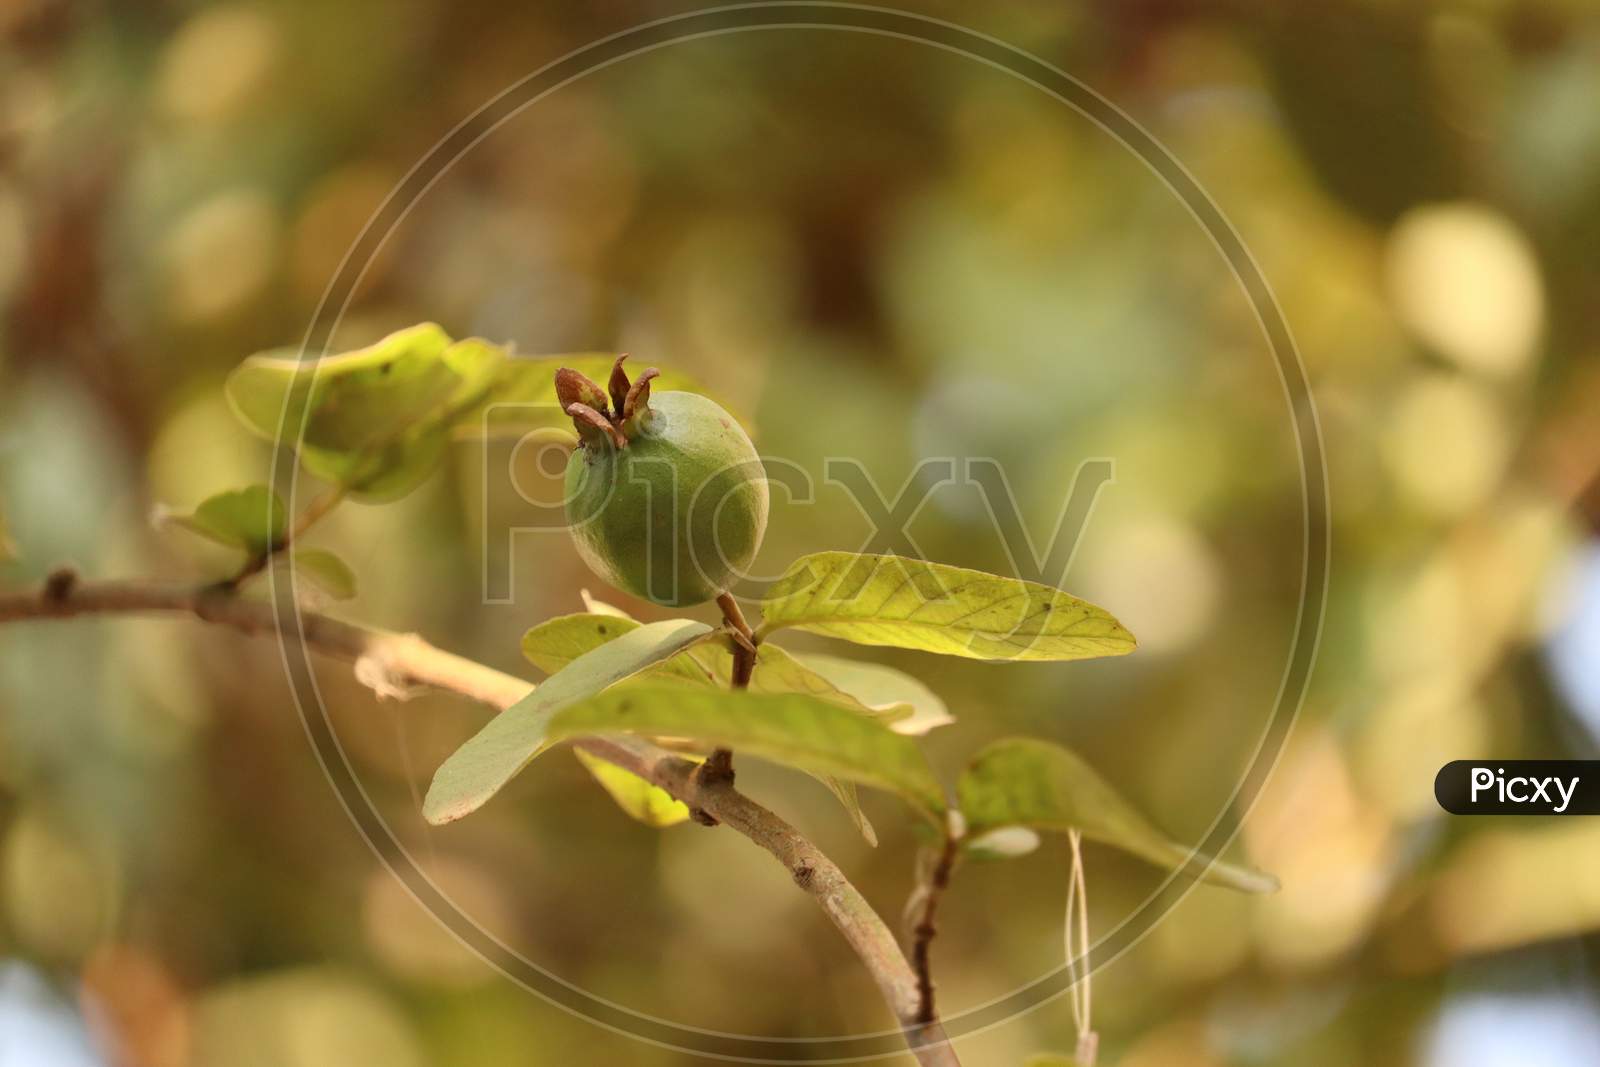 Indian Guava tree, stock image